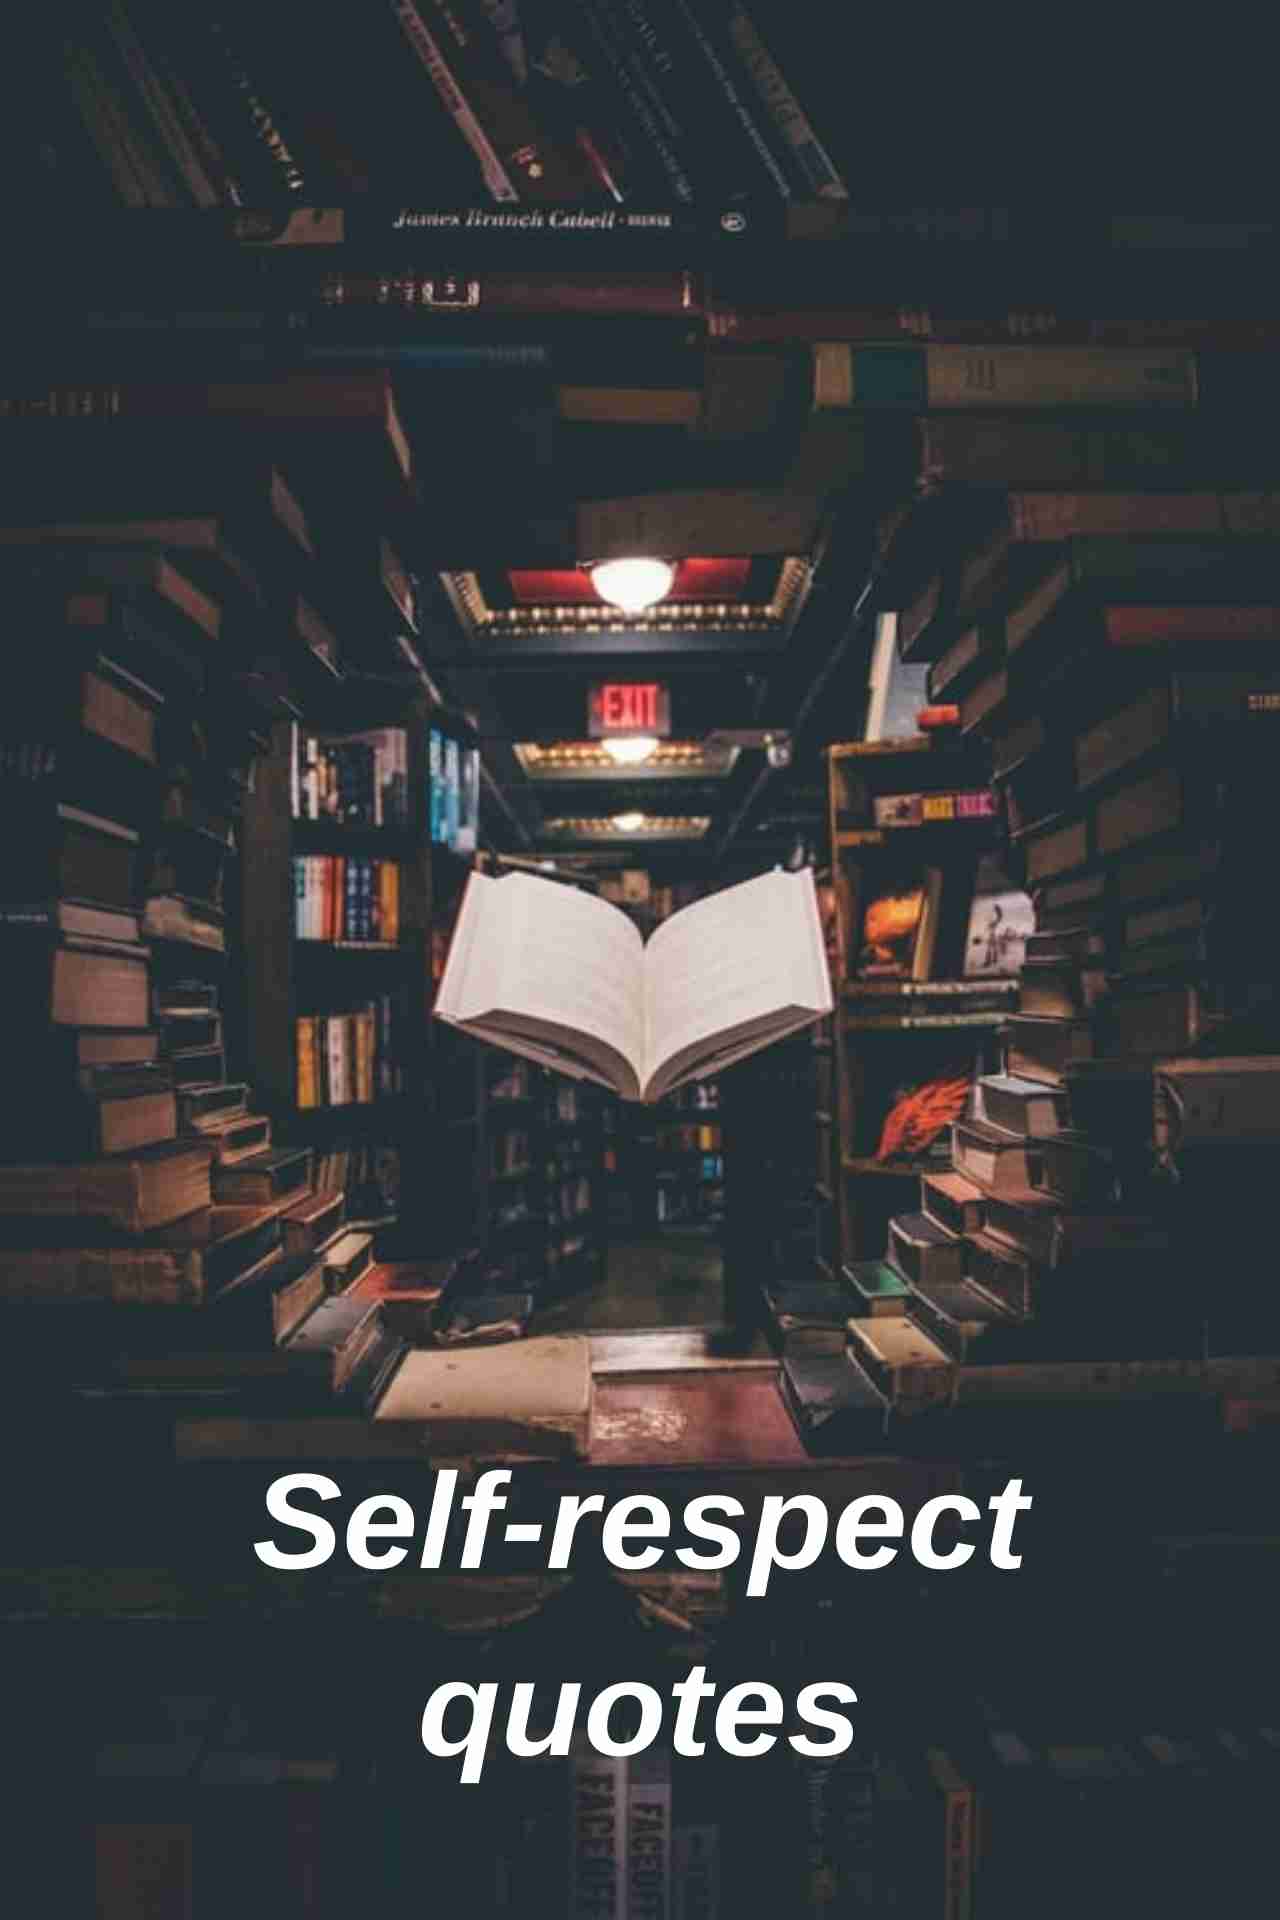 Self-respect quotes